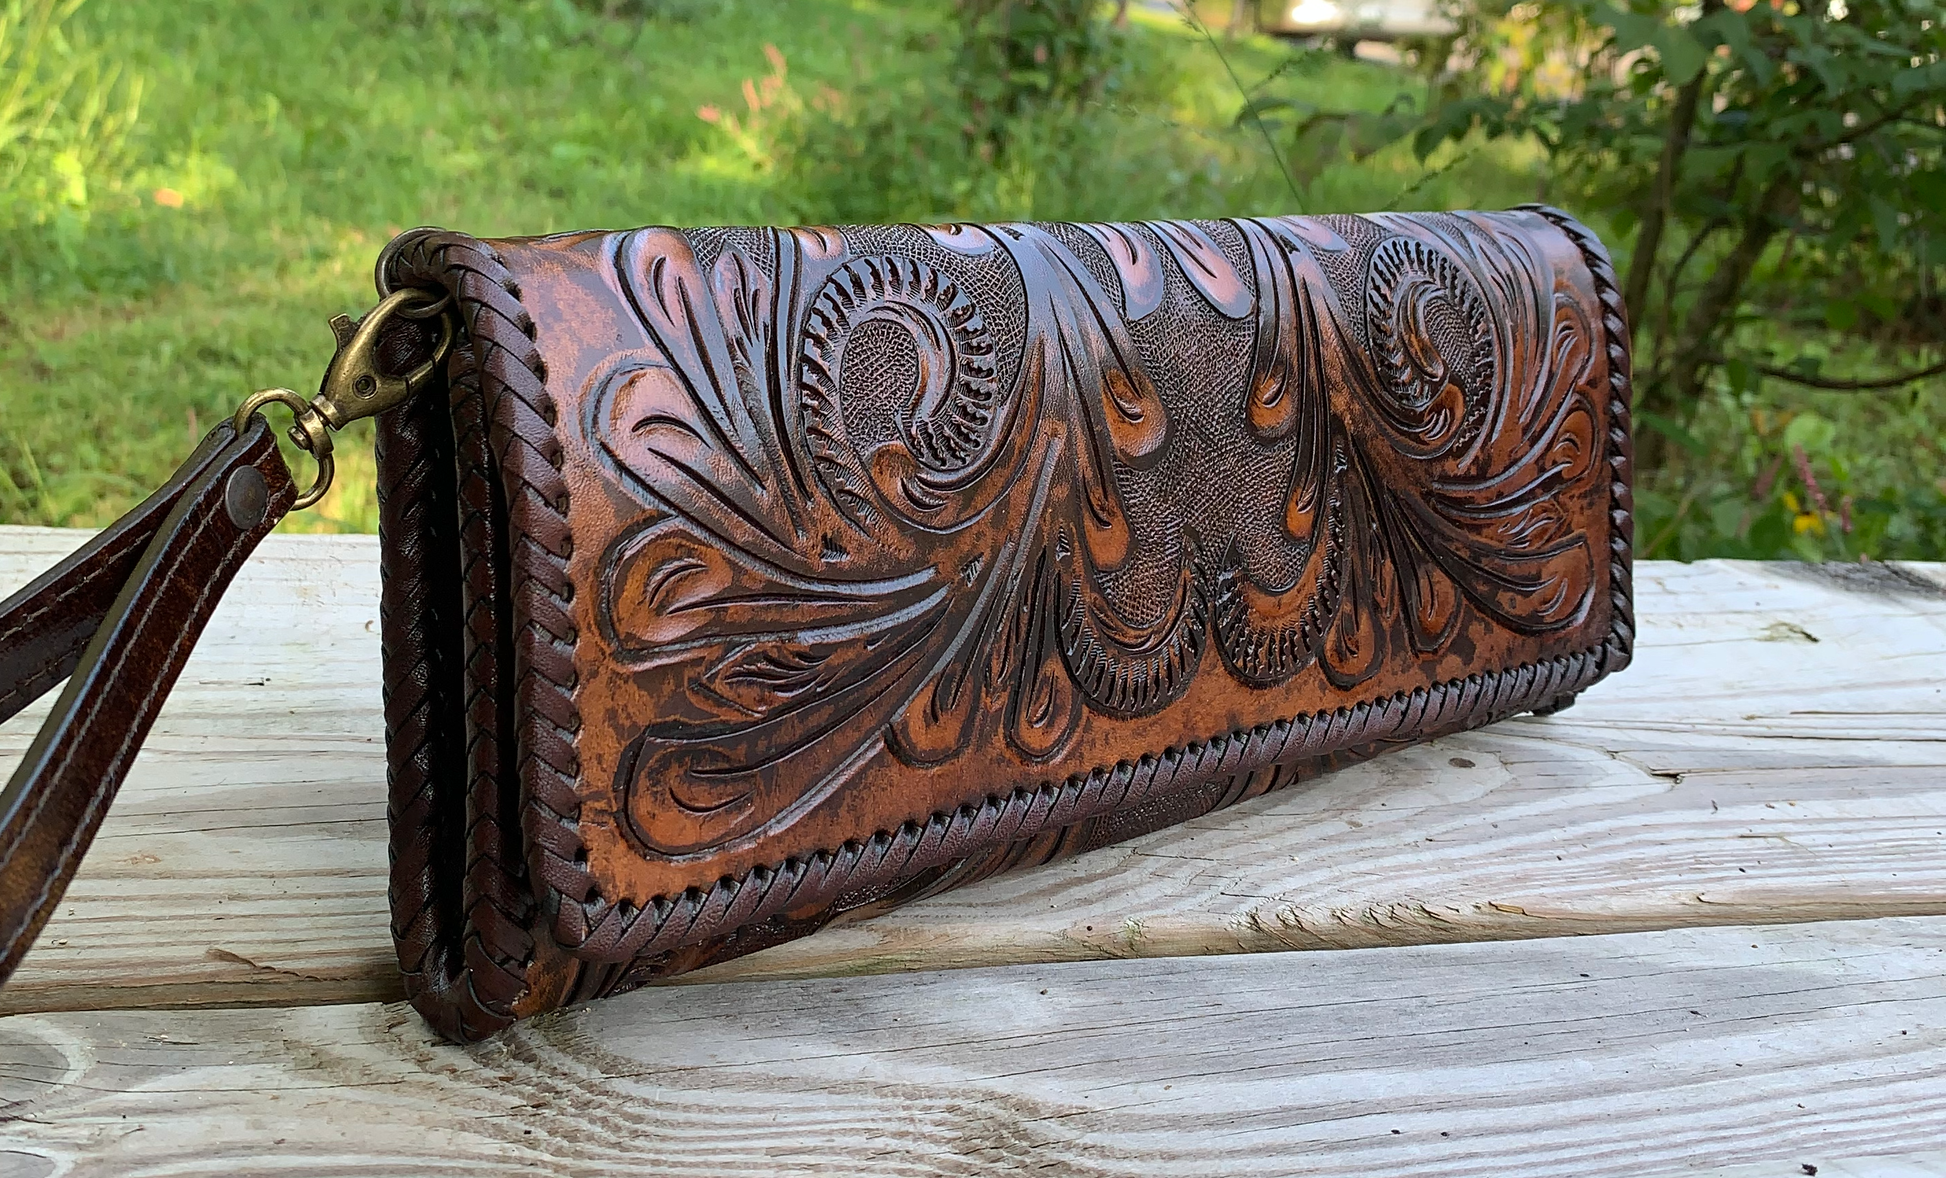 Hand Tooled Leather Clutch - Wristlet "Oaxaca" by ALLE, Vintage Boho style - ALLE Handbags